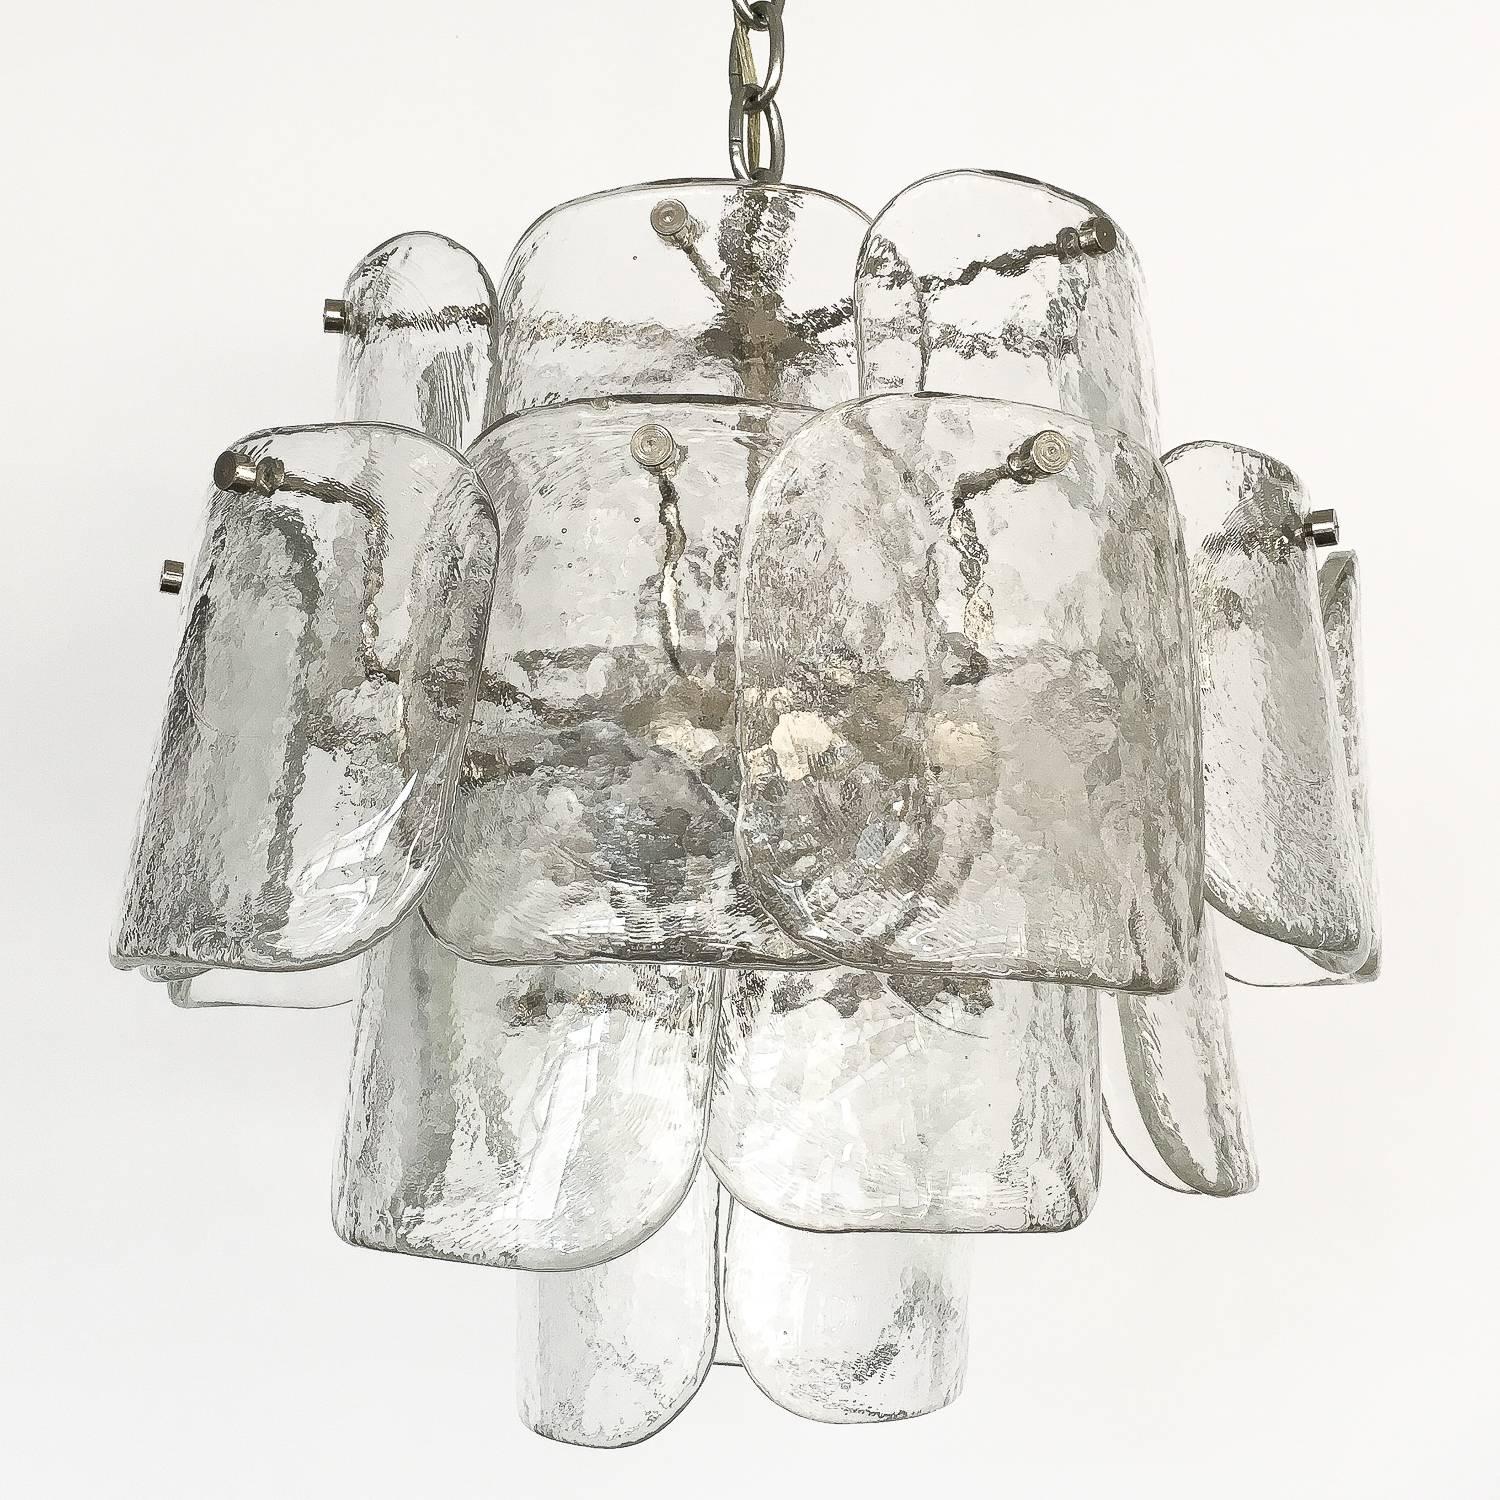 A Mazzega four-tier clear Murano glass chandelier. Consisting of 26 curved petal or 